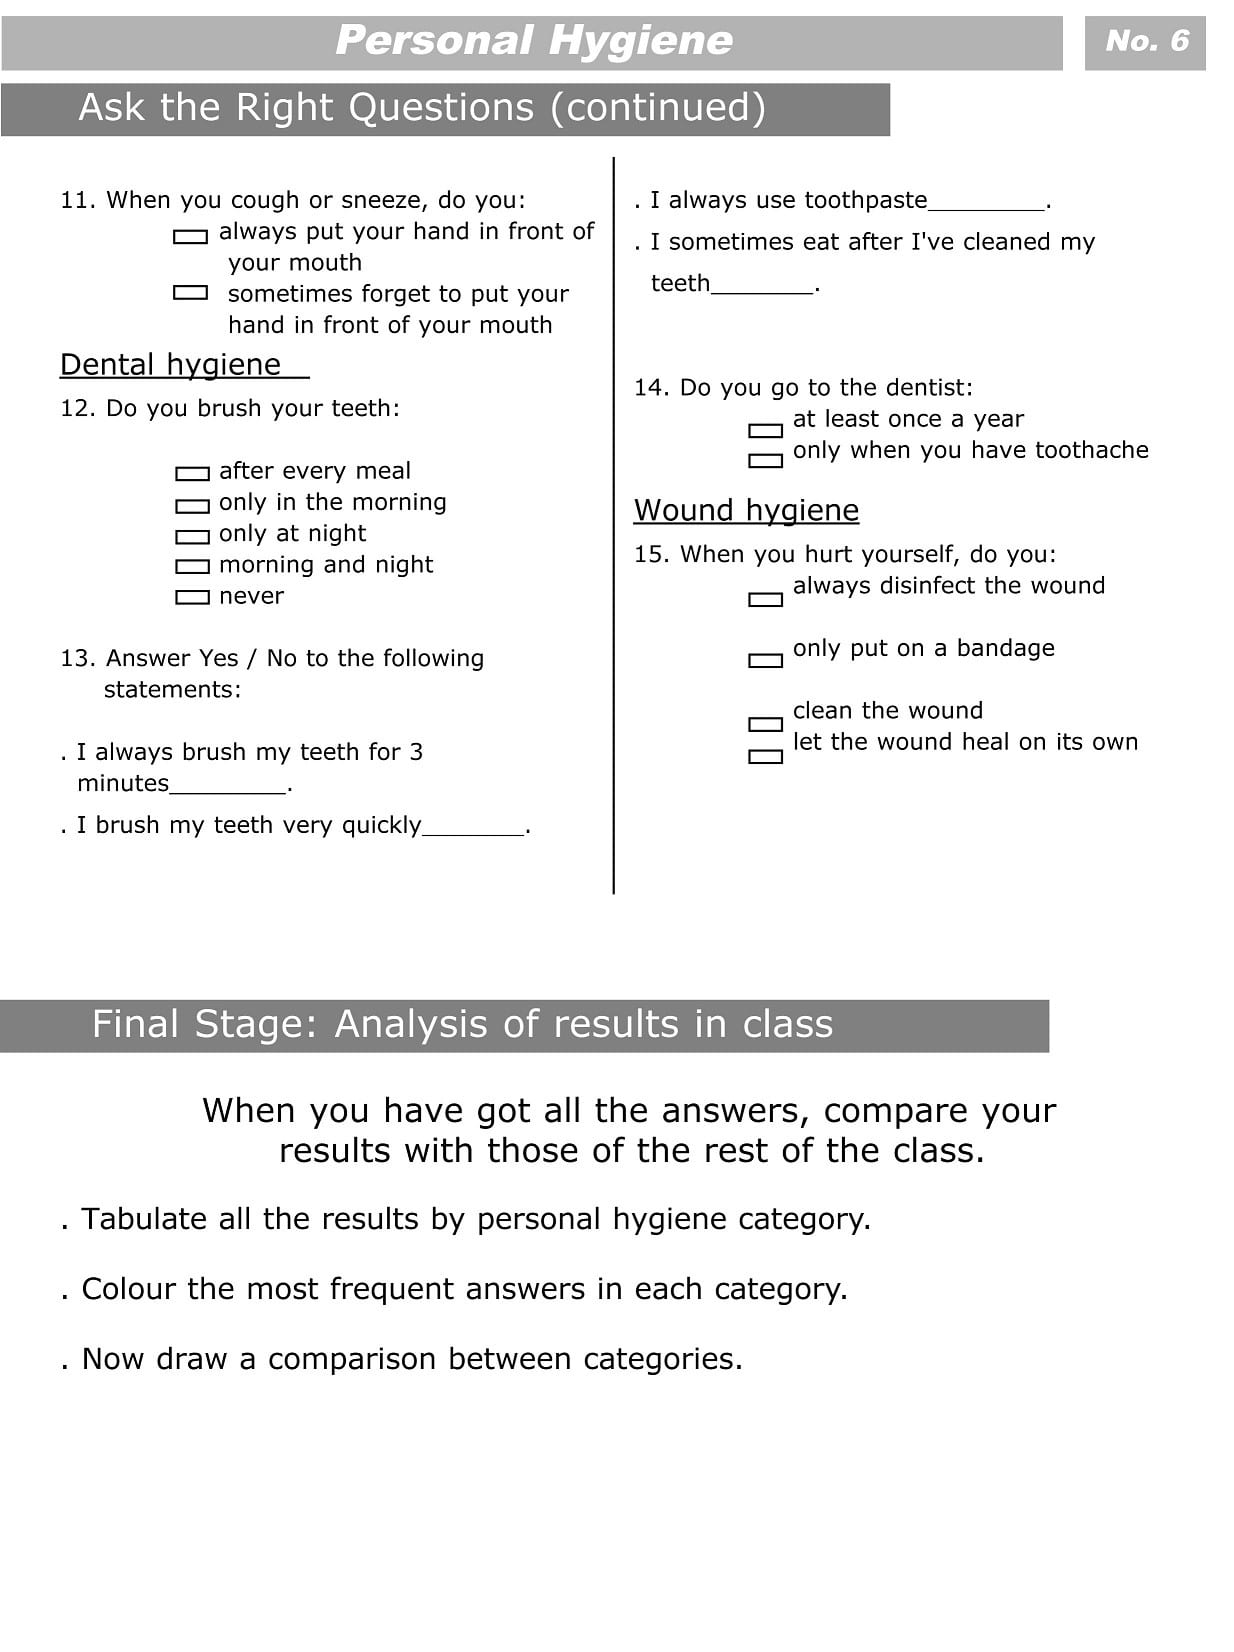 Personal Hygiene Worksheets For Kids Level 2 6  Personal